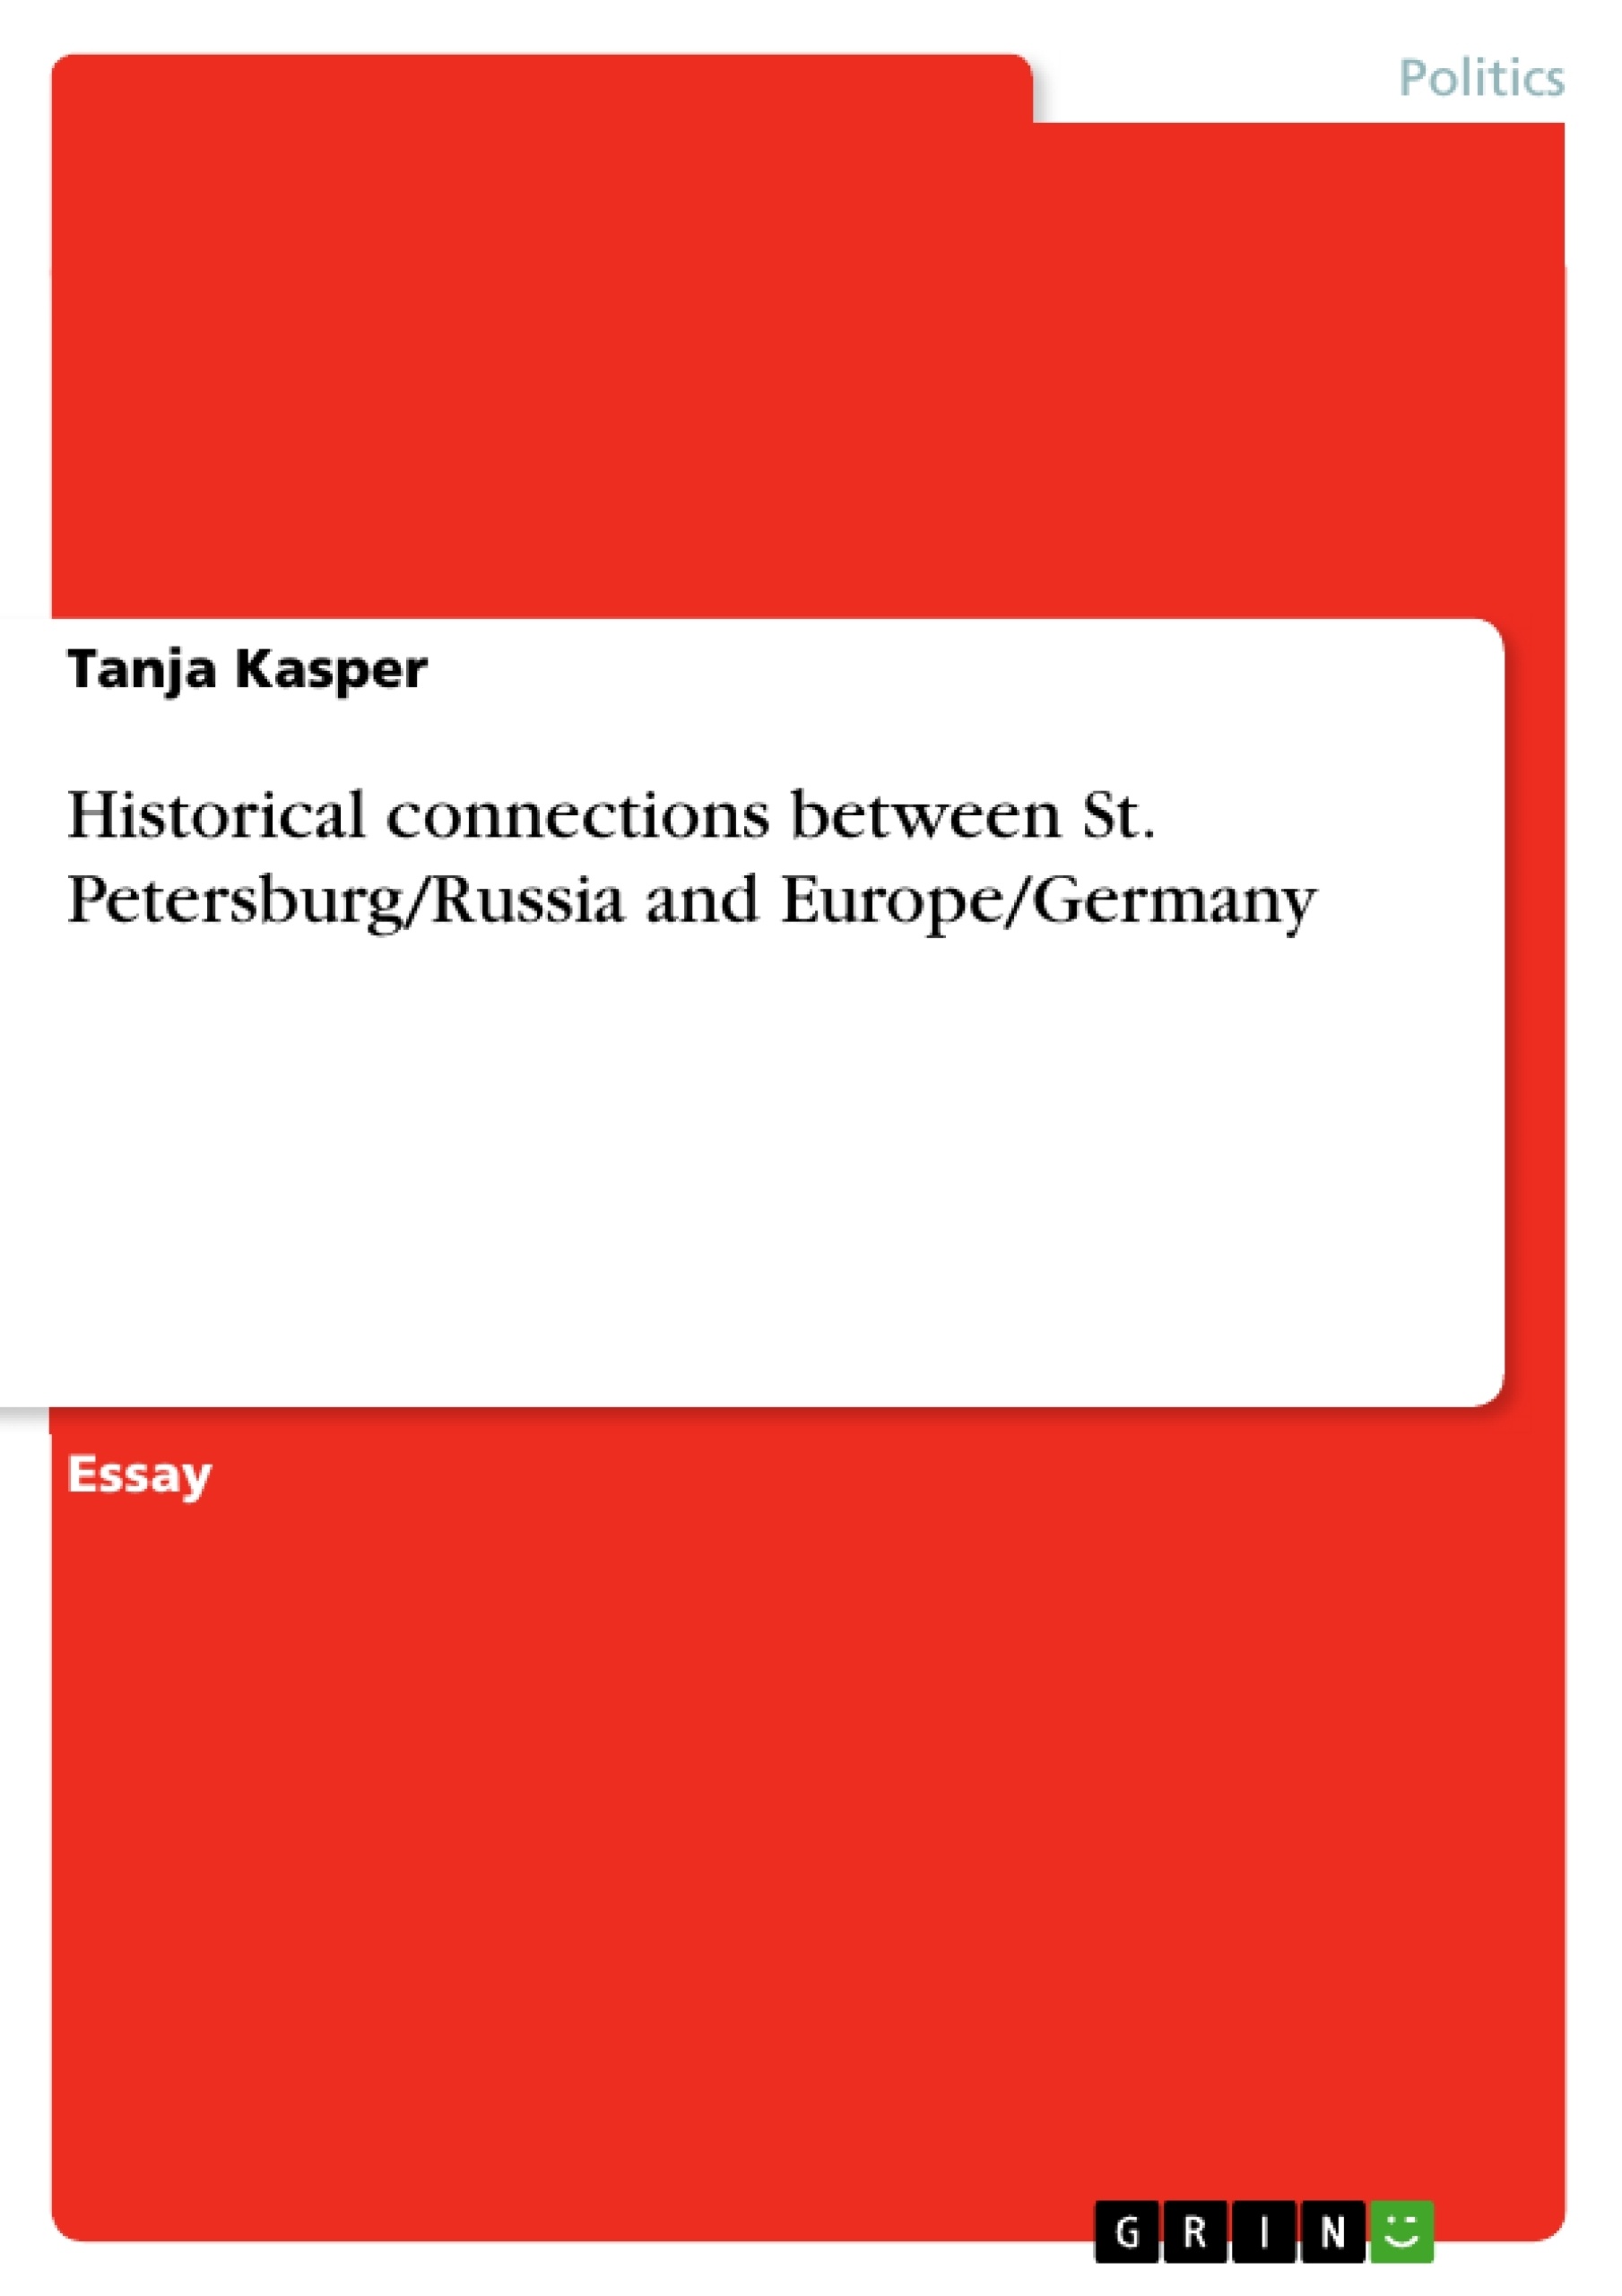 Titre: Historical connections between St. Petersburg/Russia and Europe/Germany